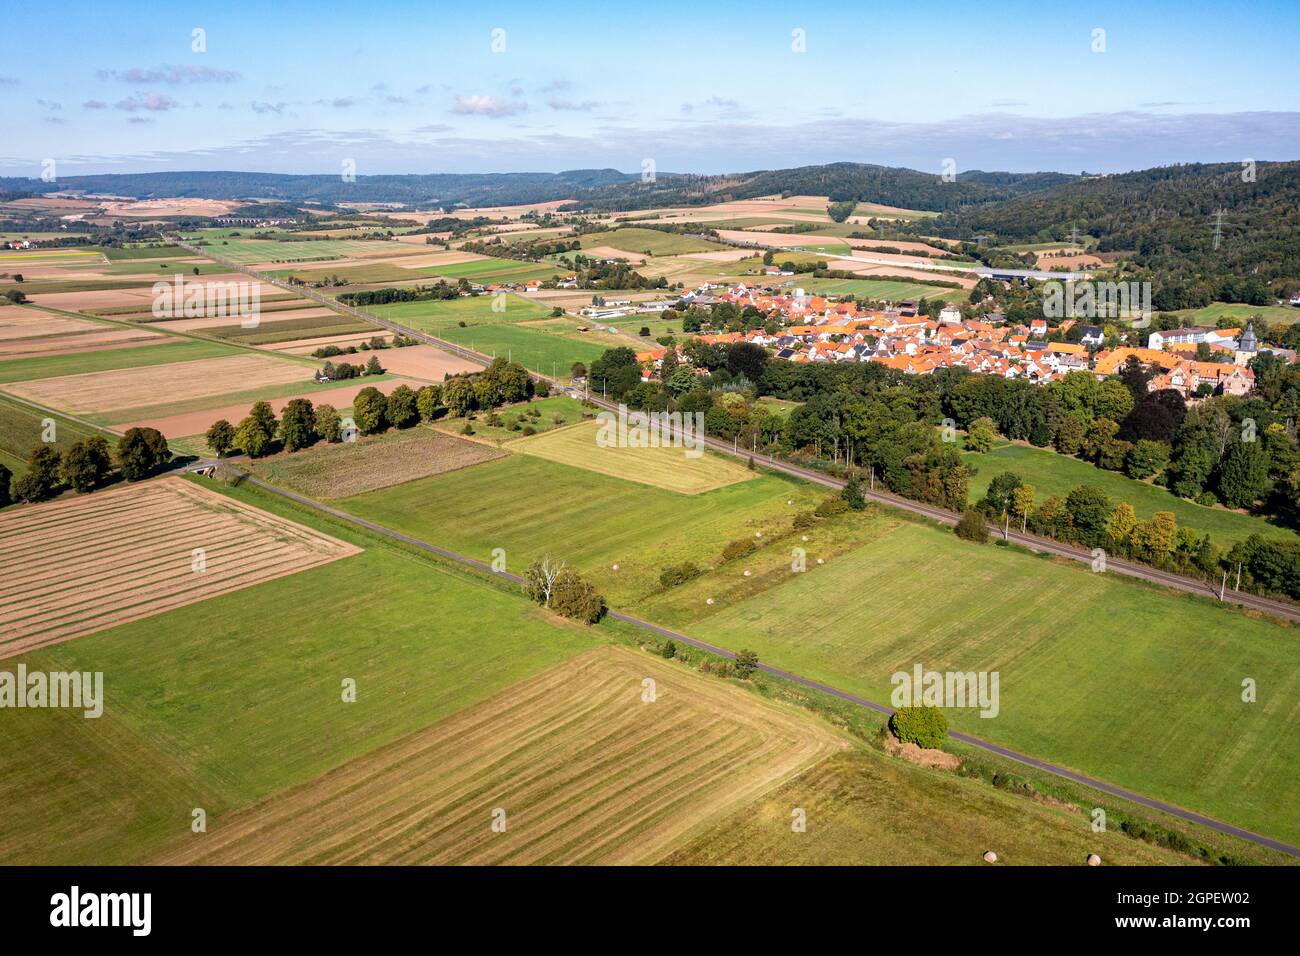 The landscape of the Werra Valley at Herleshausen in Hesse in Germany Stock Photo